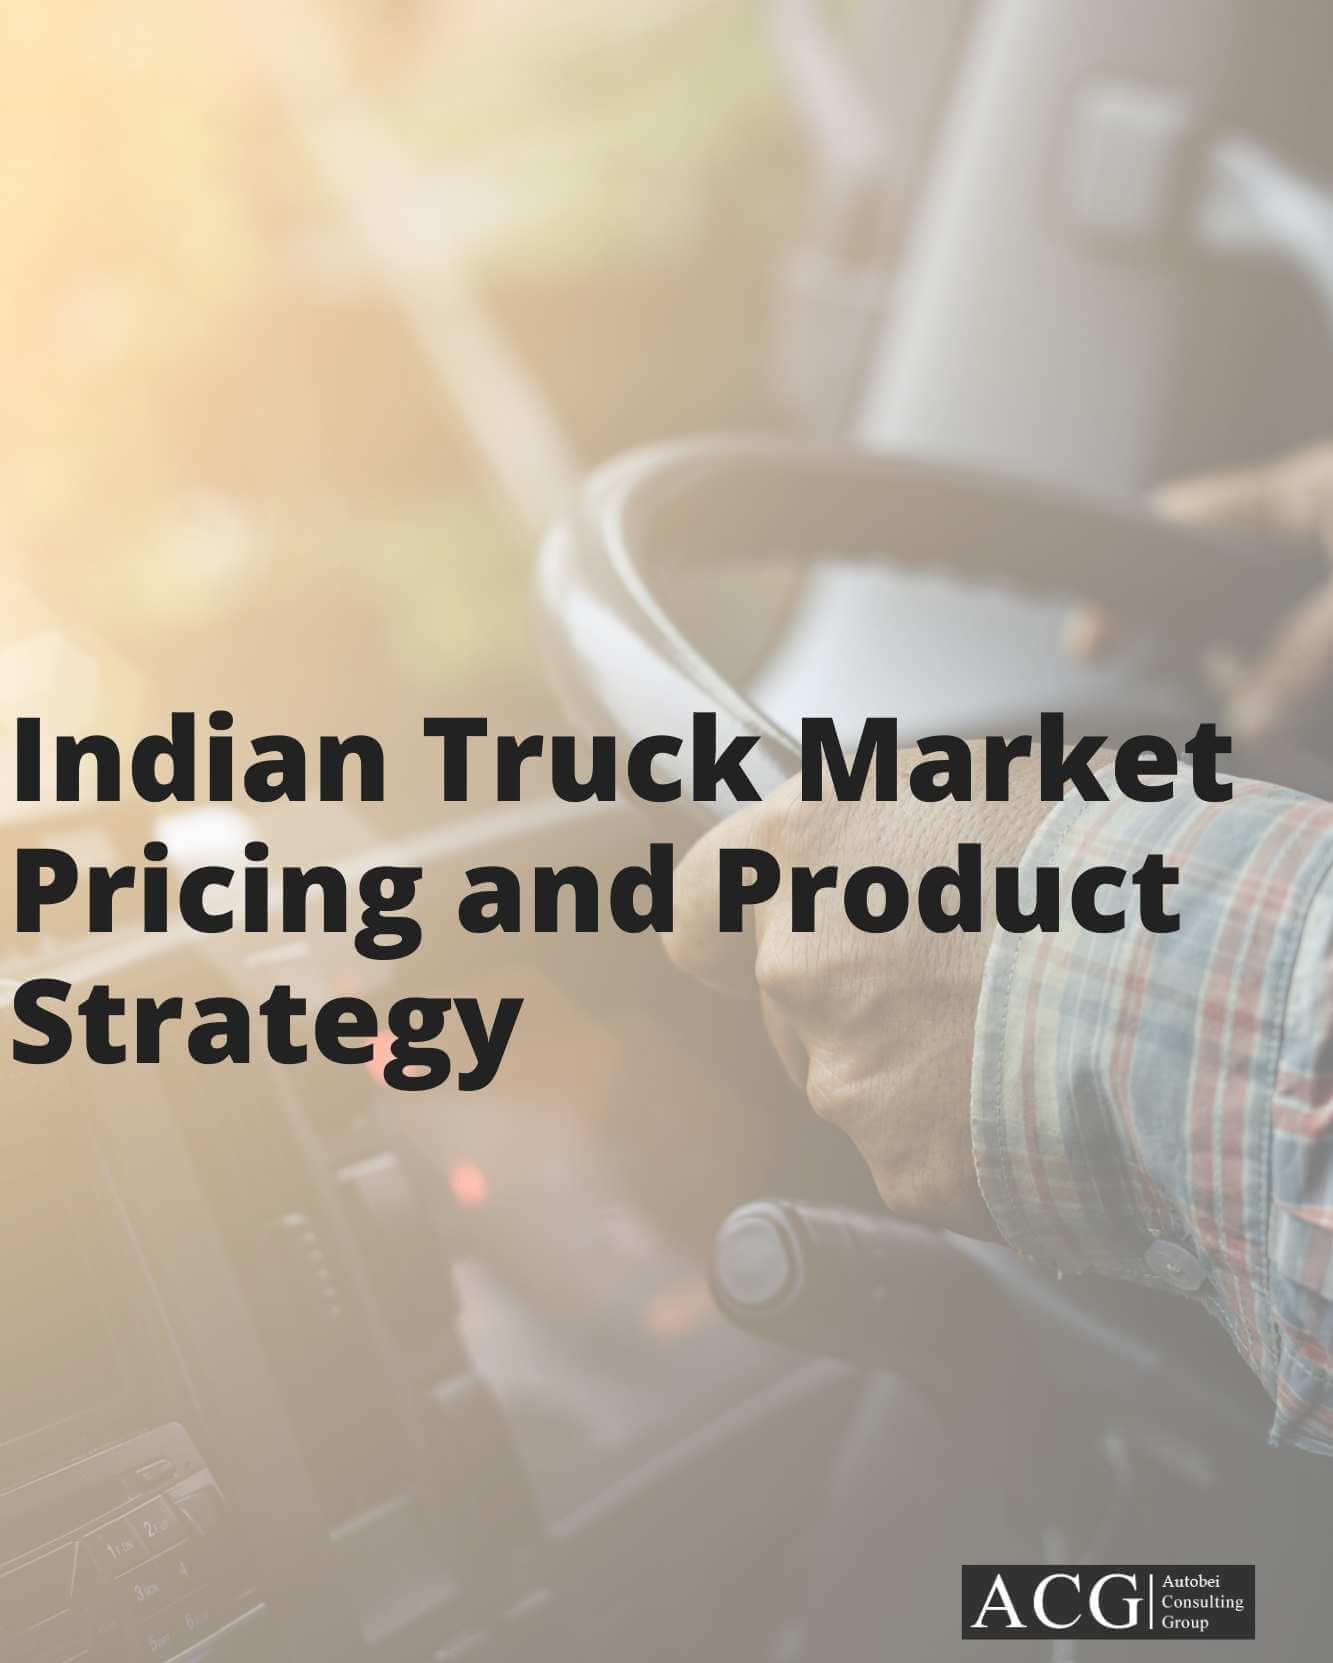 Indian Truck Market Pricing and Product Strategy